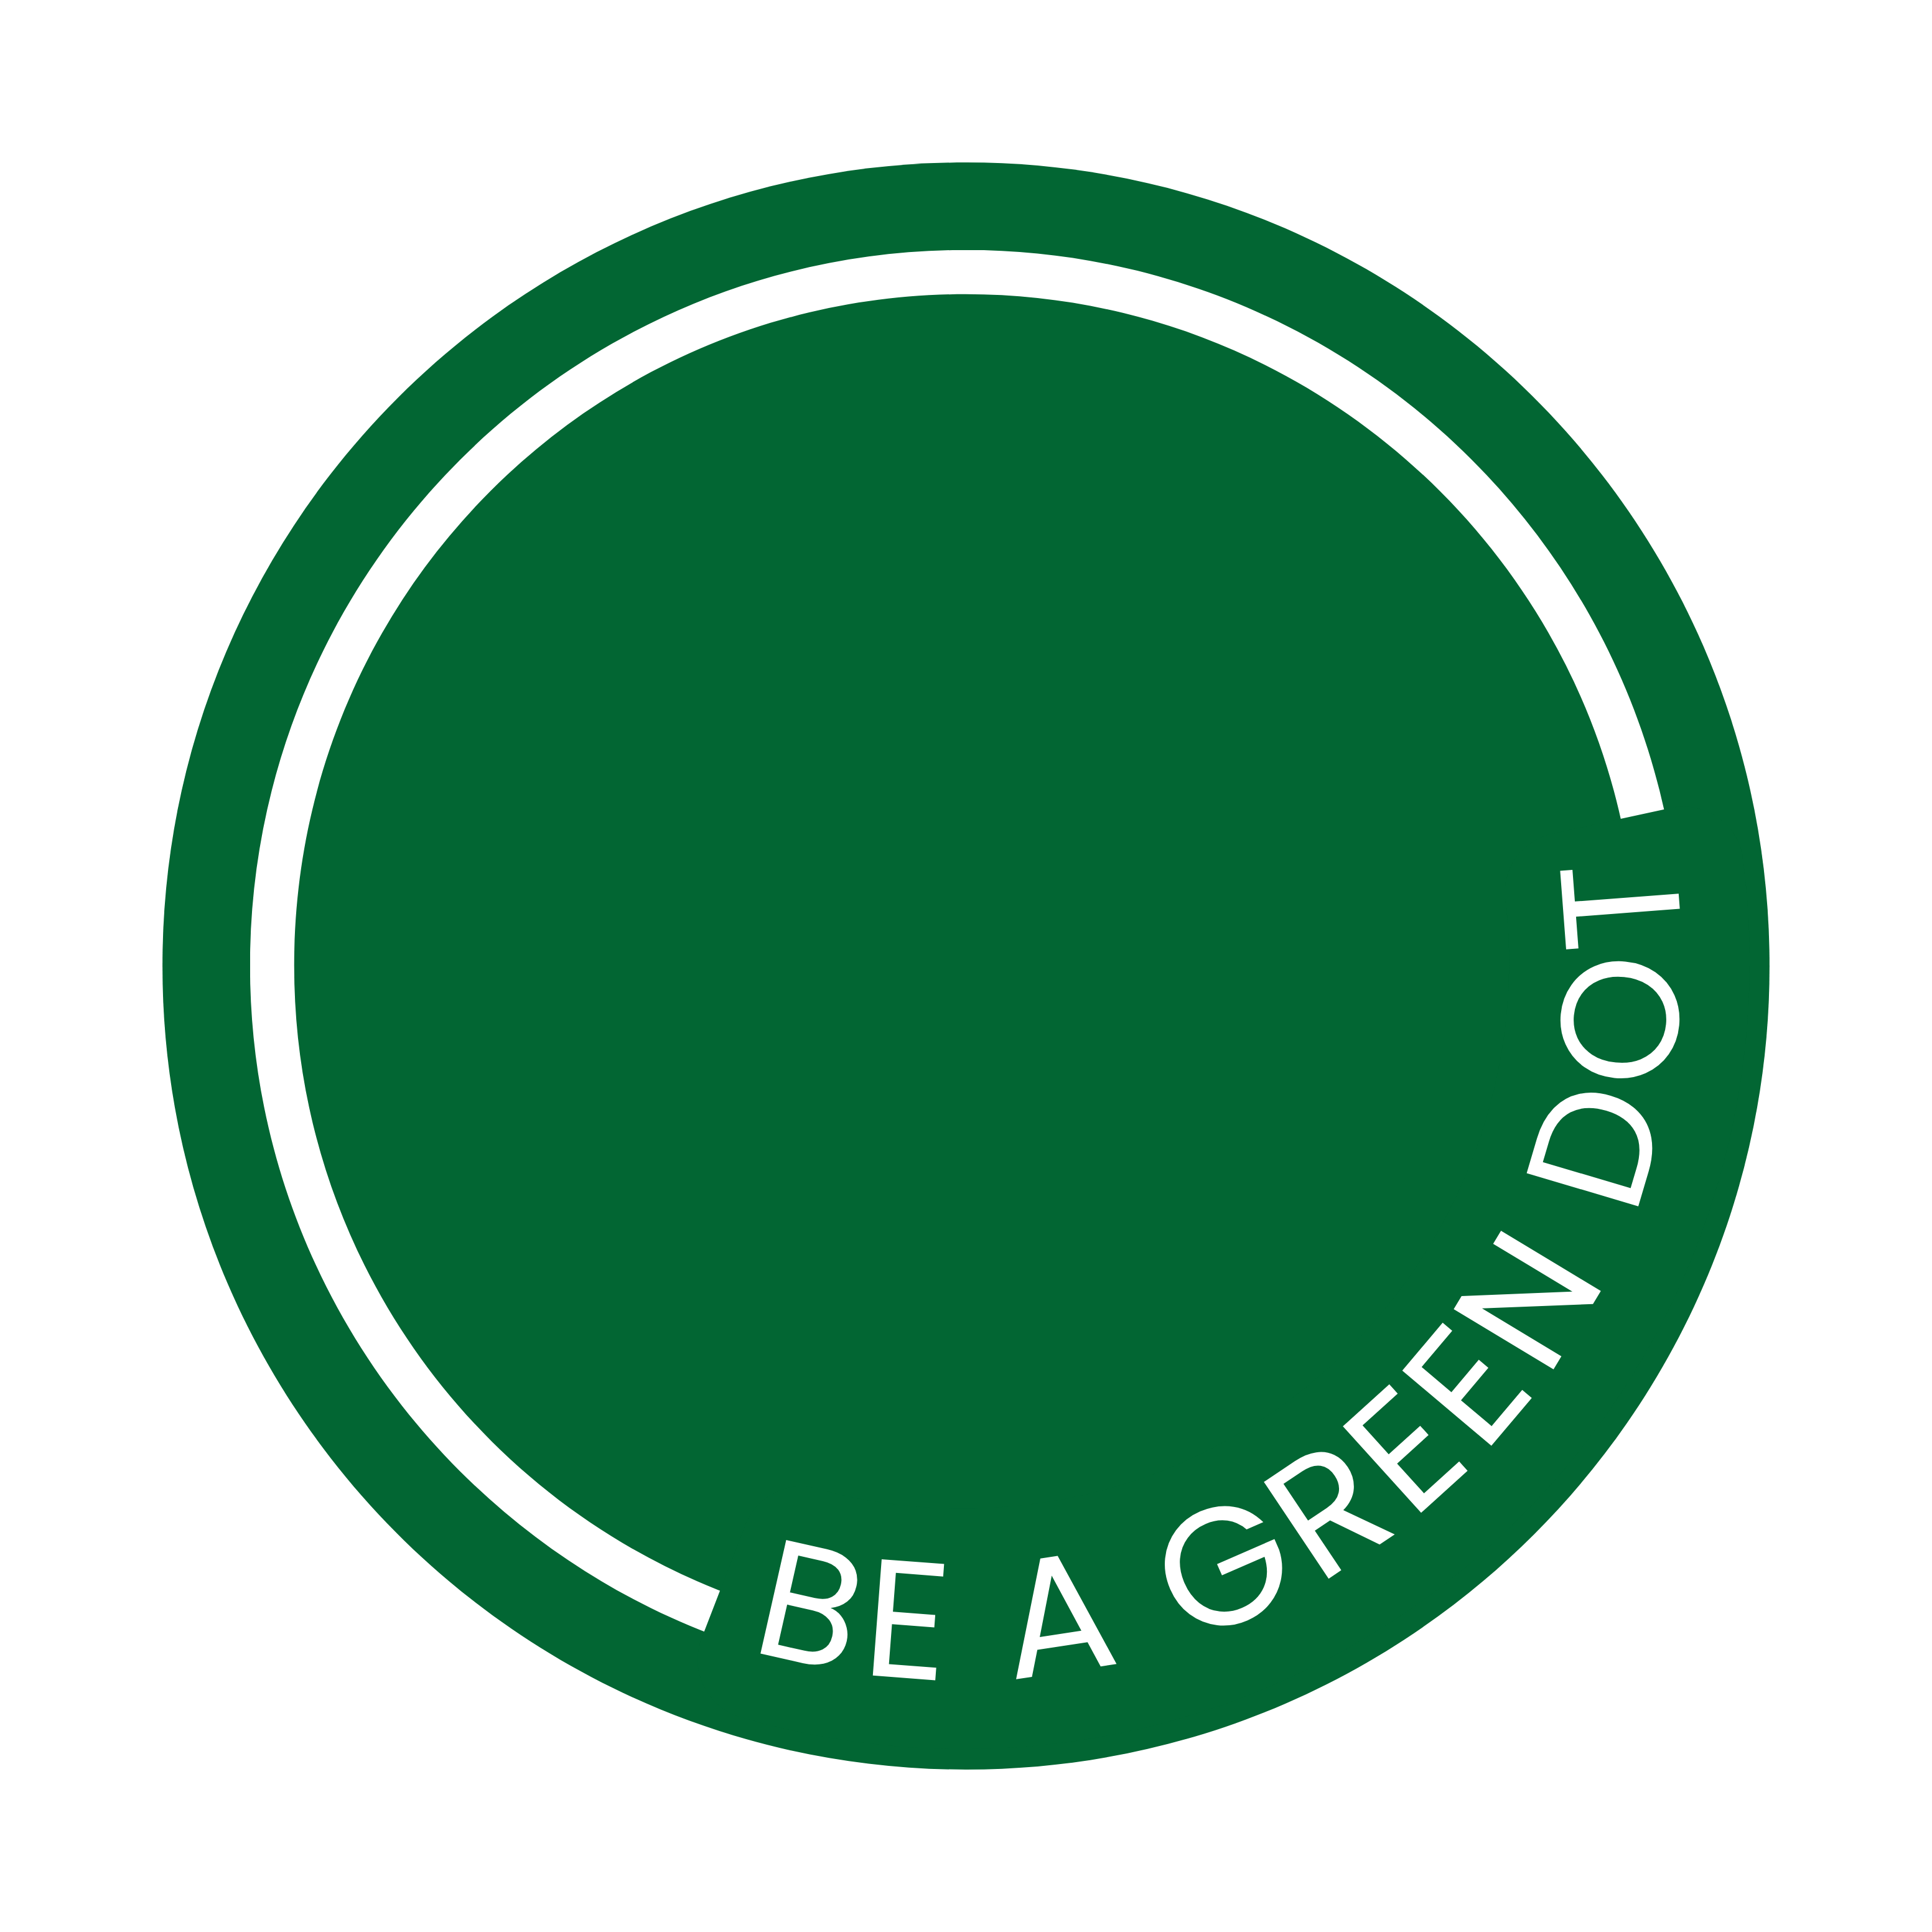 Green Circle with Be A Green Dot text